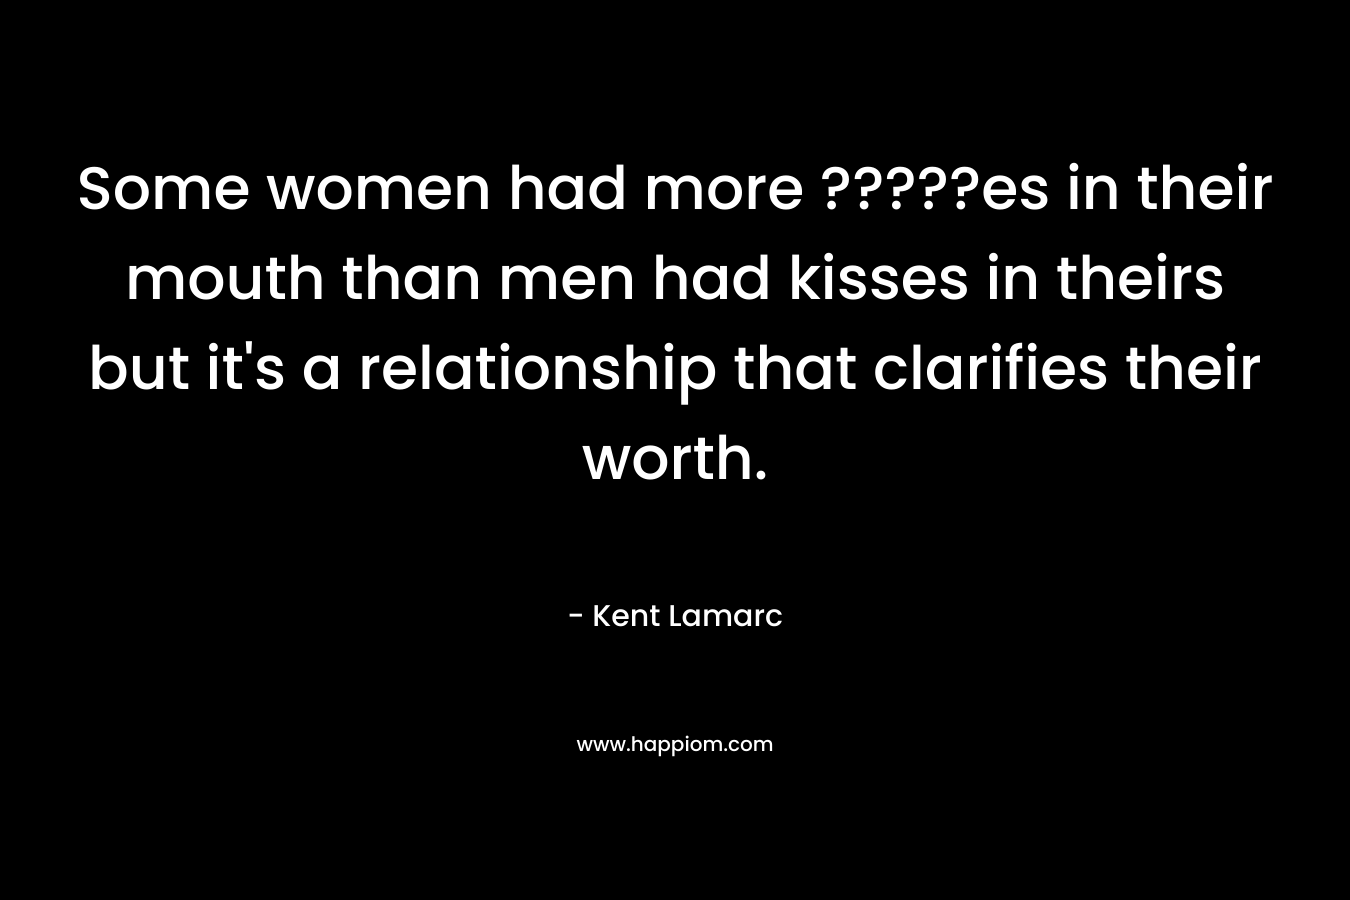 Some women had more ?????es in their mouth than men had kisses in theirs but it’s a relationship that clarifies their worth. – Kent Lamarc